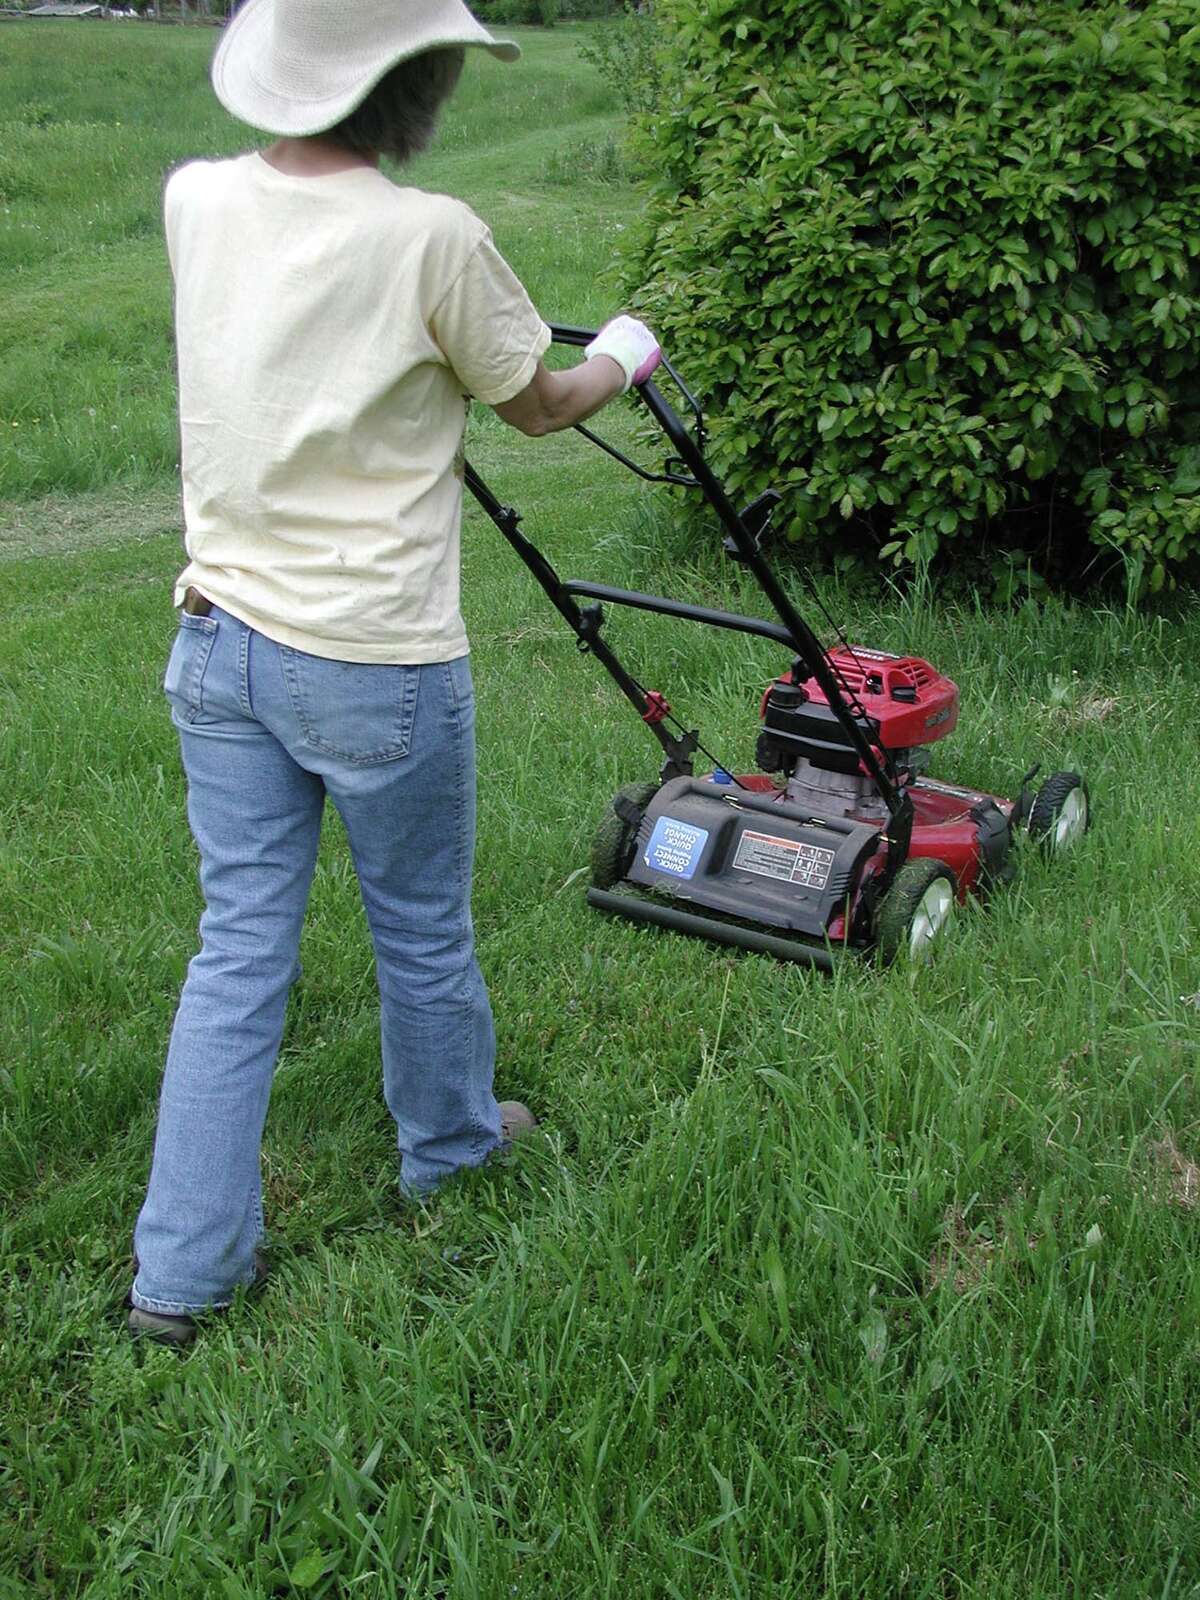 Use a mulch mower so grass clippings go back into the soil.